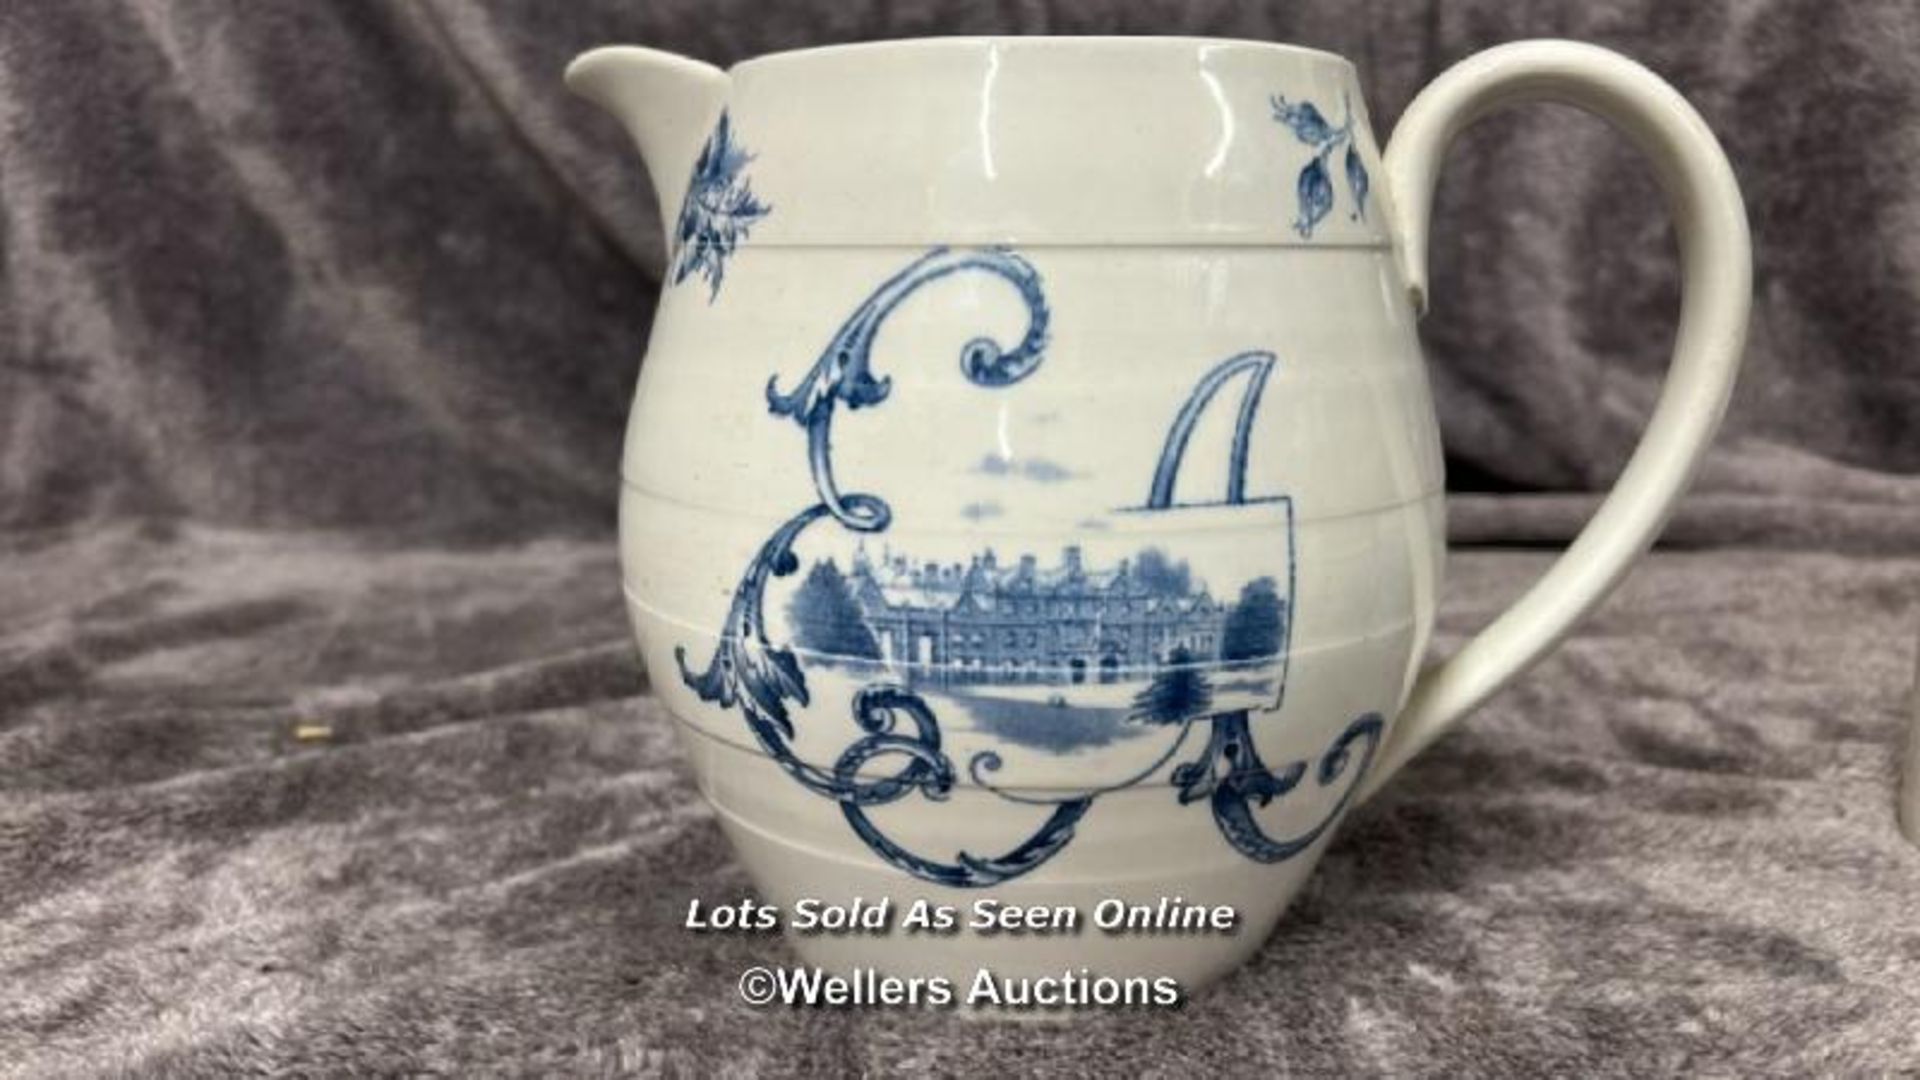 Two William Whiteley Queen Victoria longest reign mugs with one Royal Doulton King Edward VII mug - Image 8 of 10